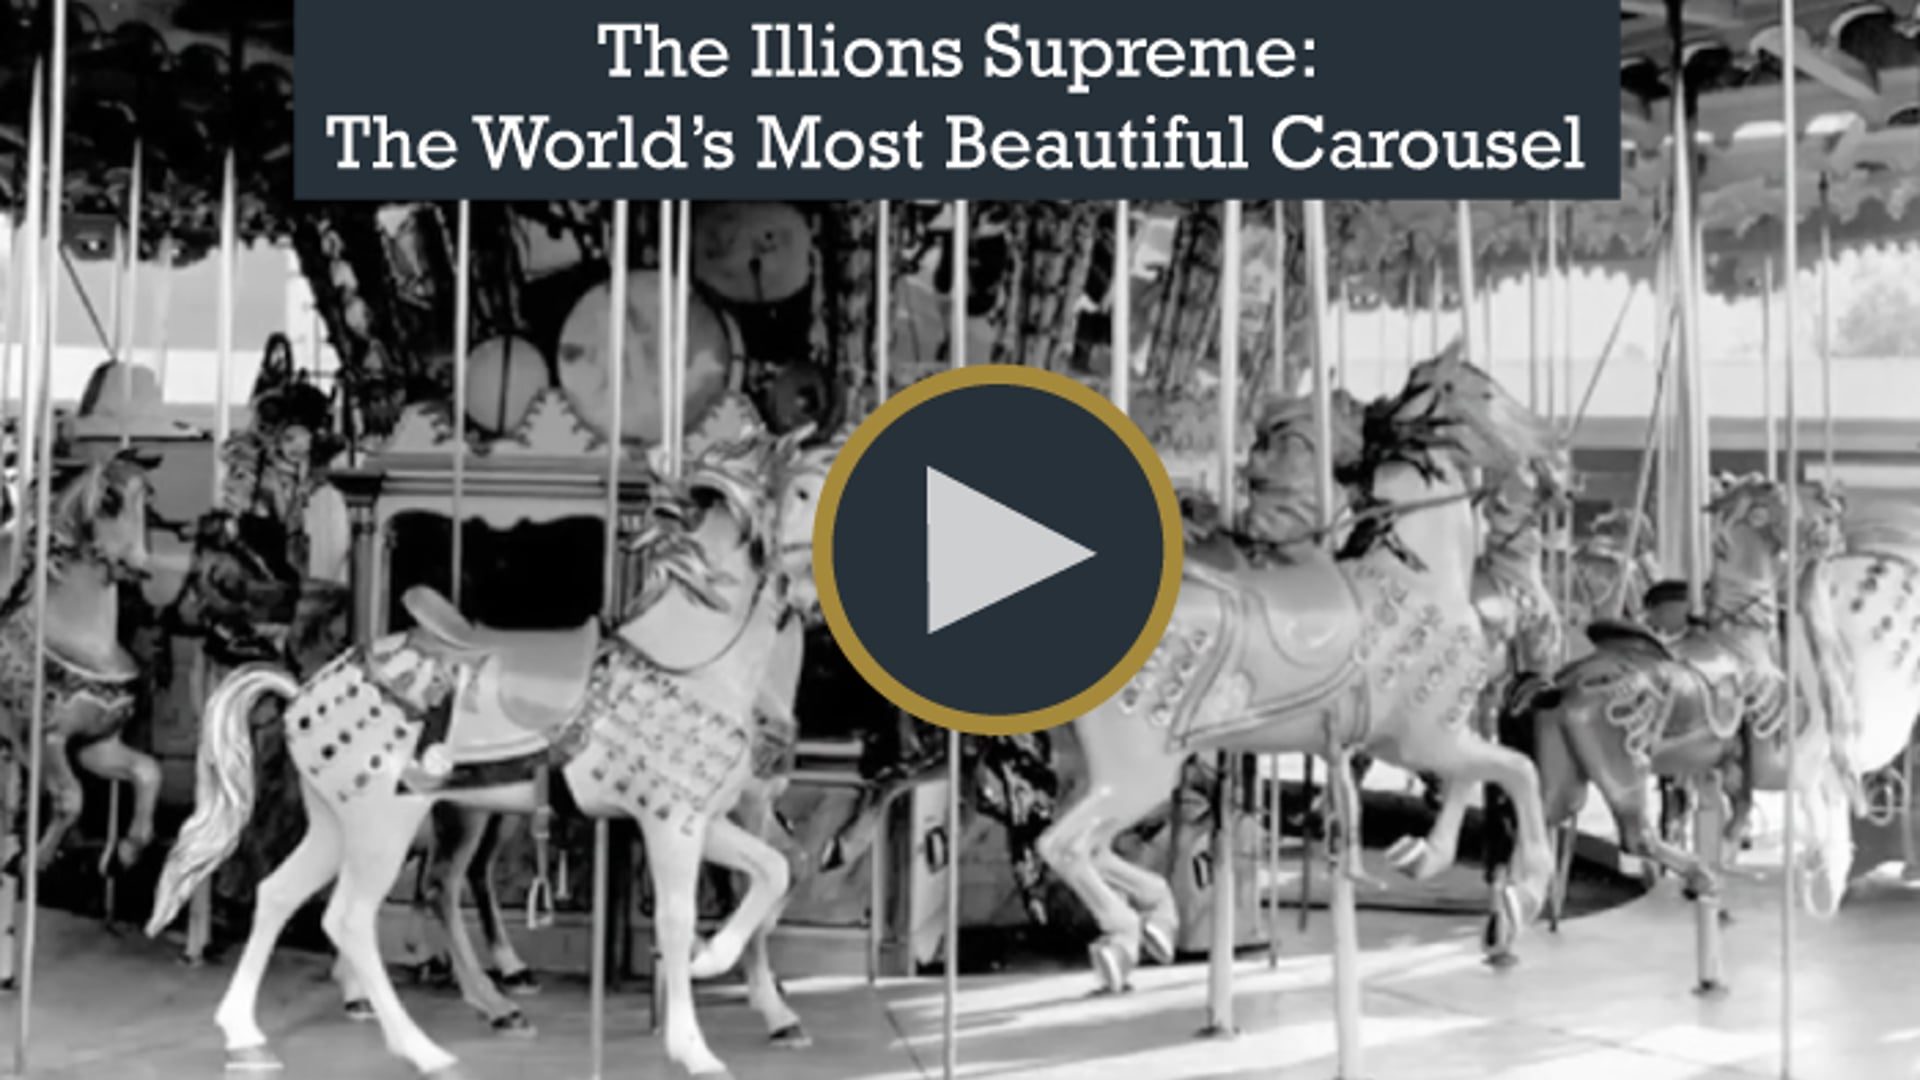 The Illions Supreme: The World's Most Beautiful Carousel